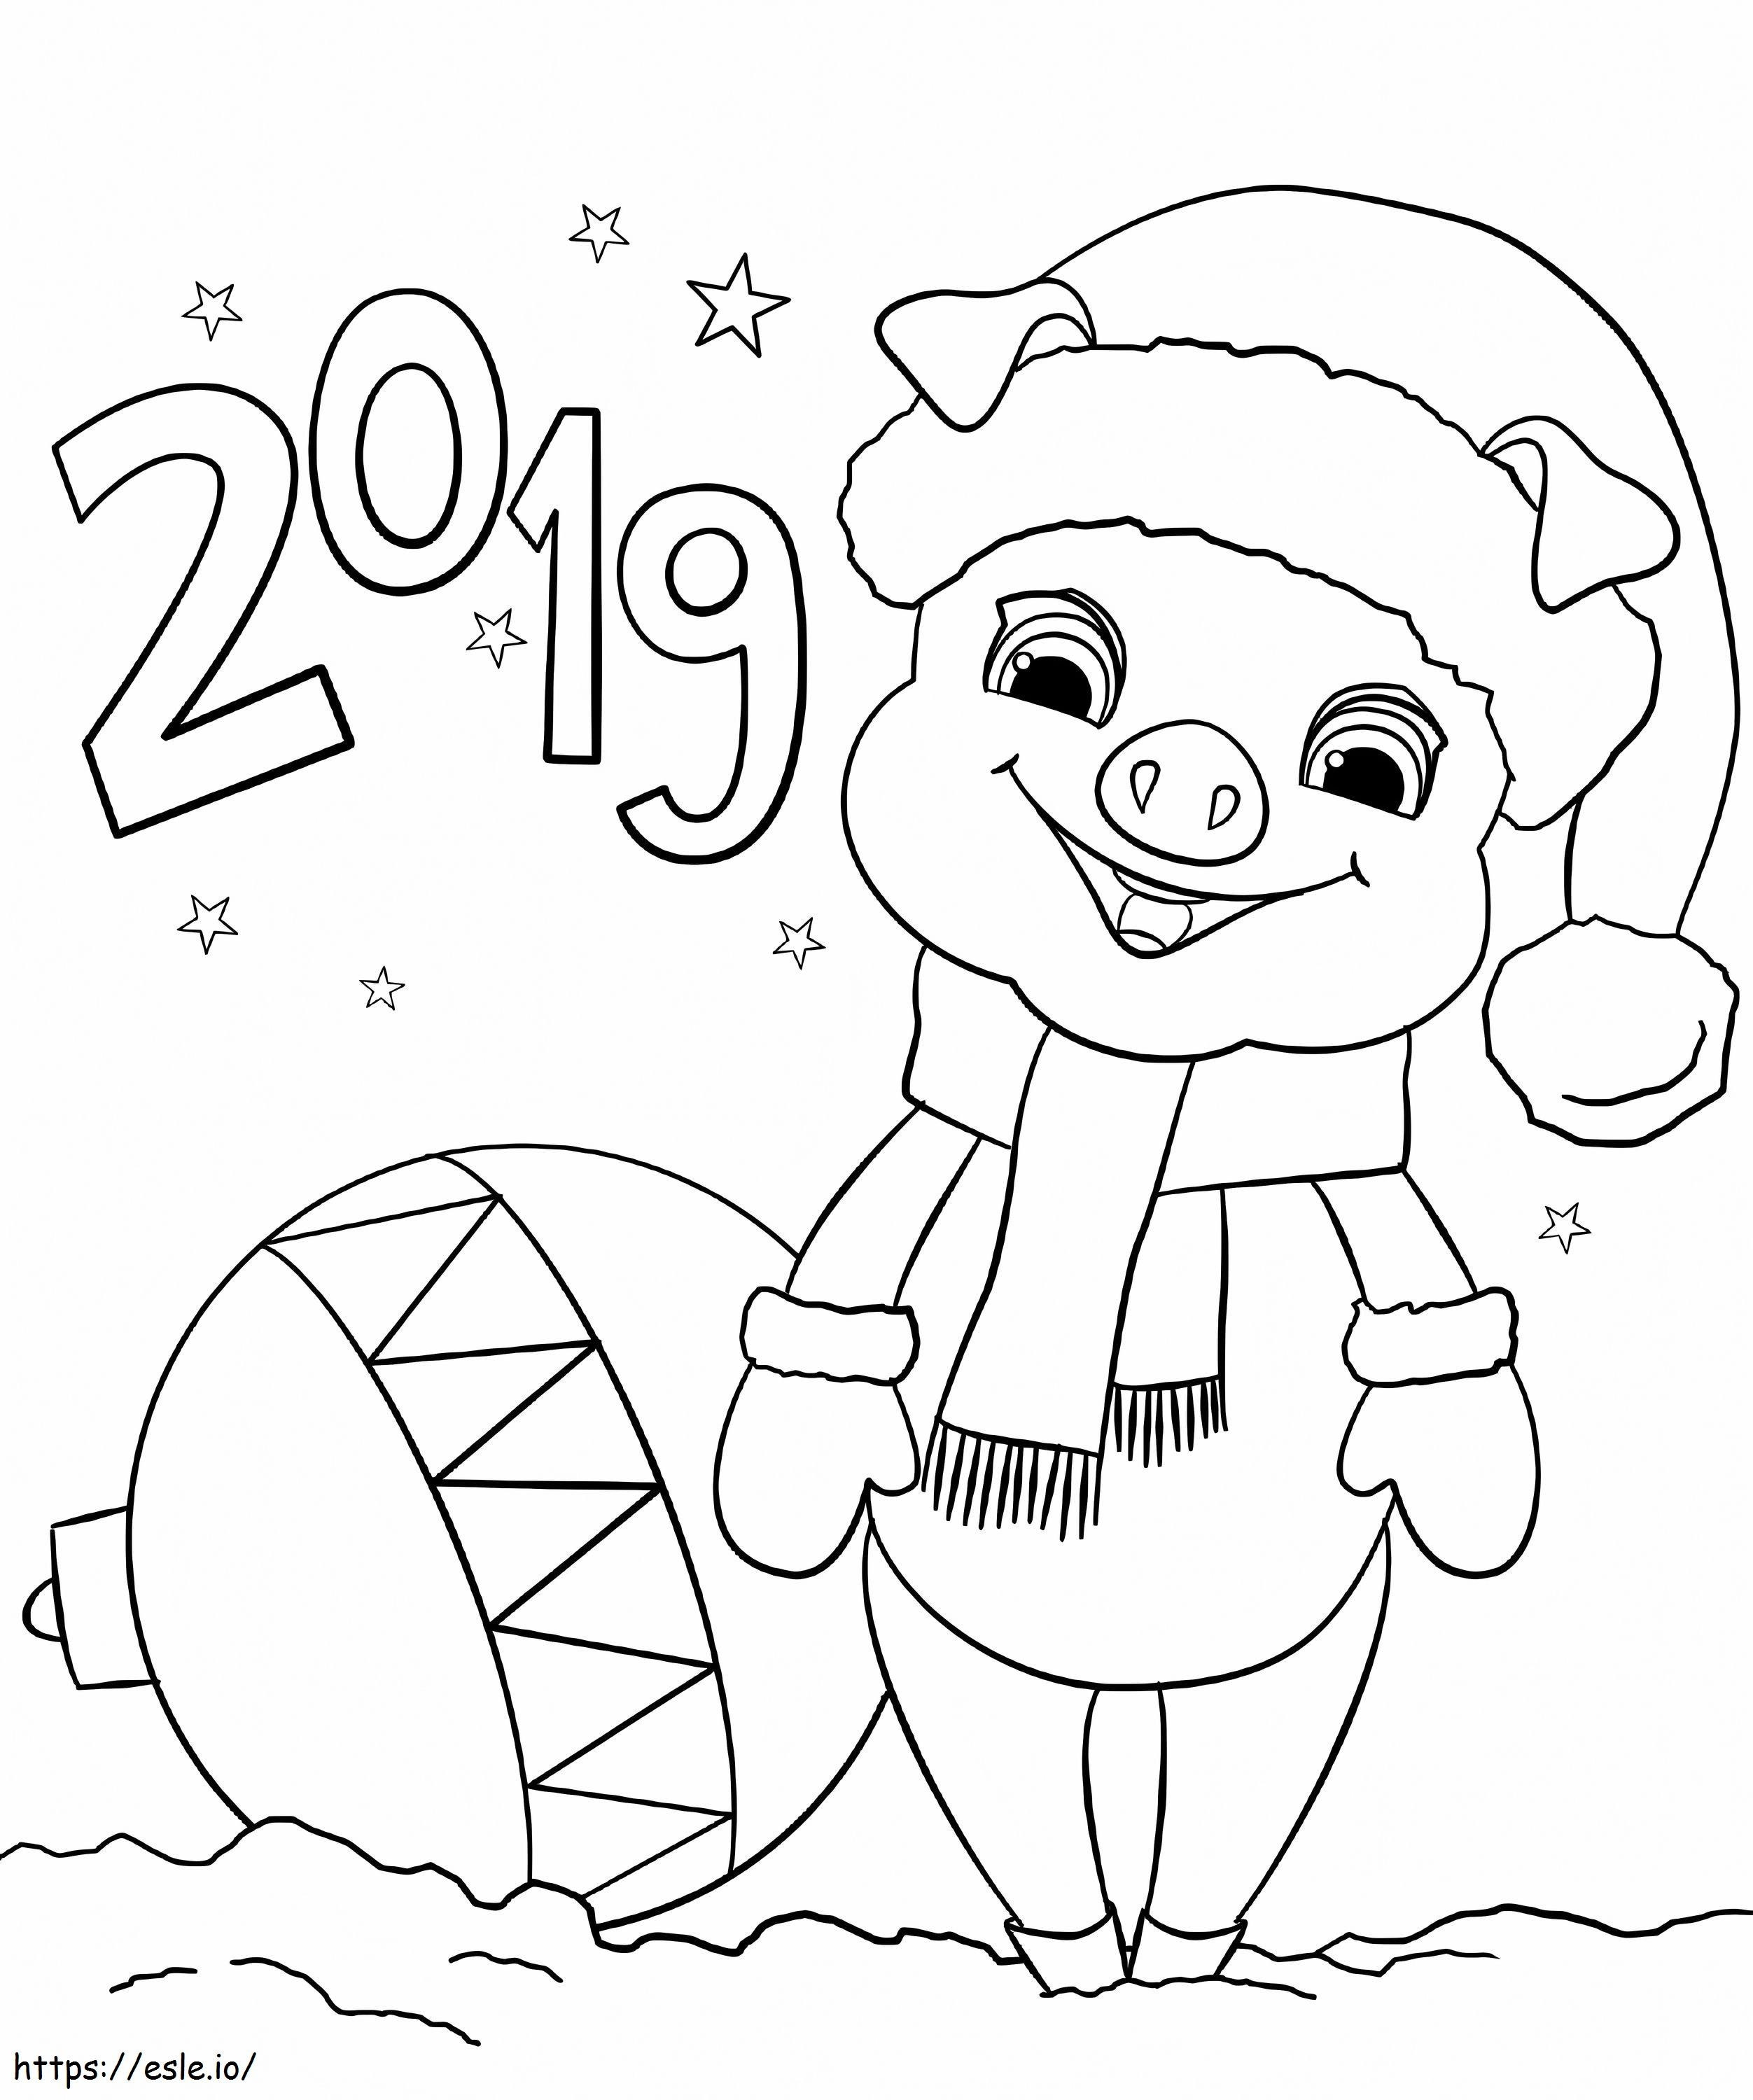 1546402696 2019 Happy New Year coloring page